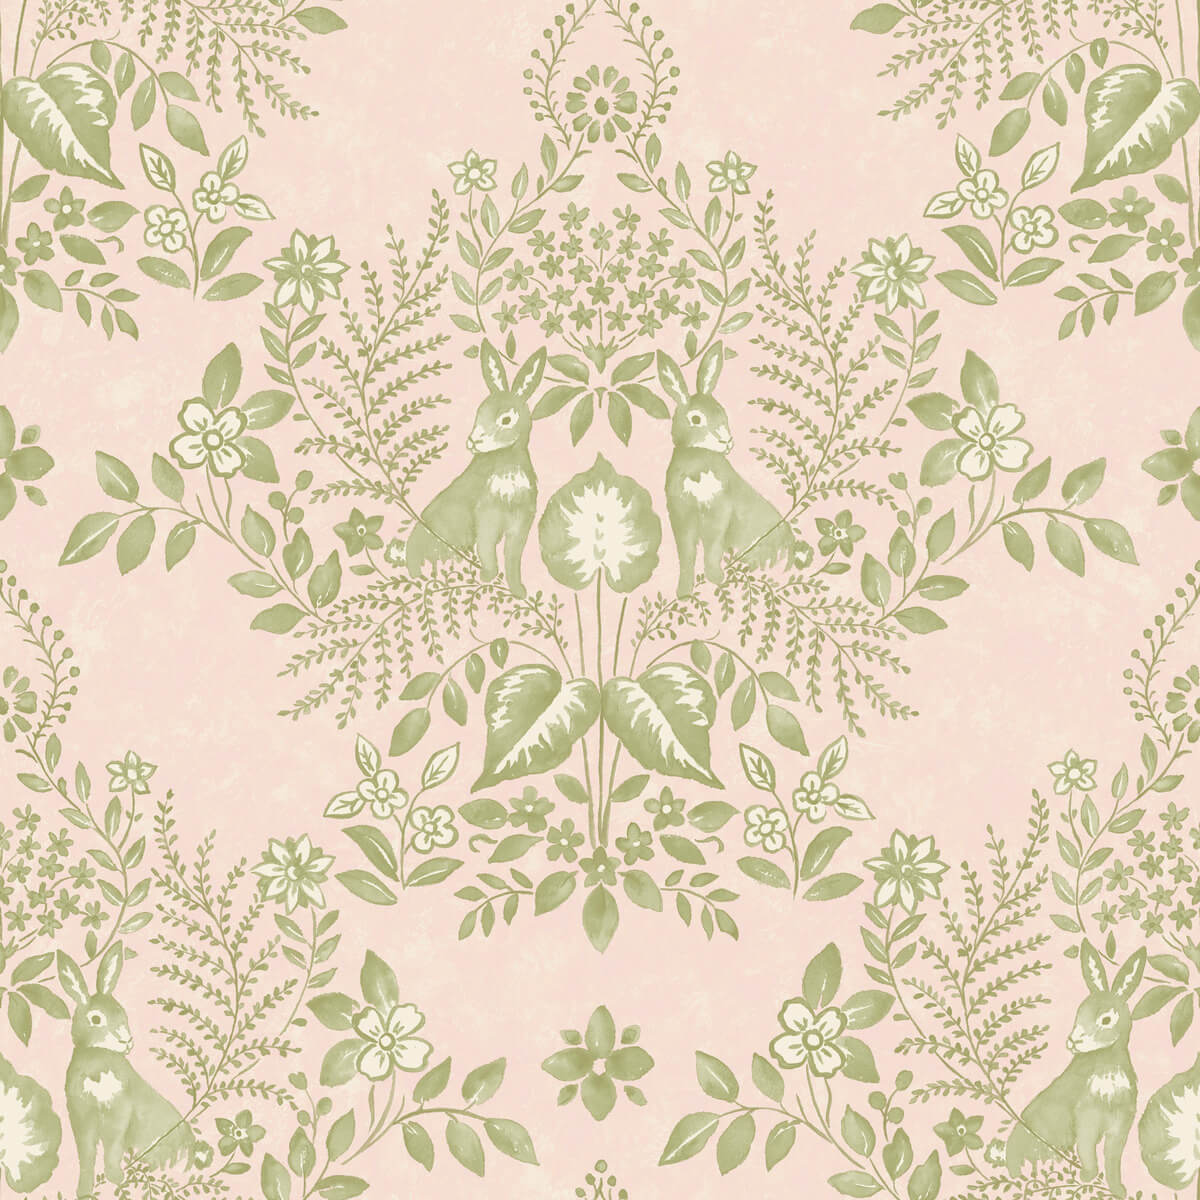 Erin & Ben Co. Cottontail Toile Peel & Stick Wallpaper - Pink & Chartreuse